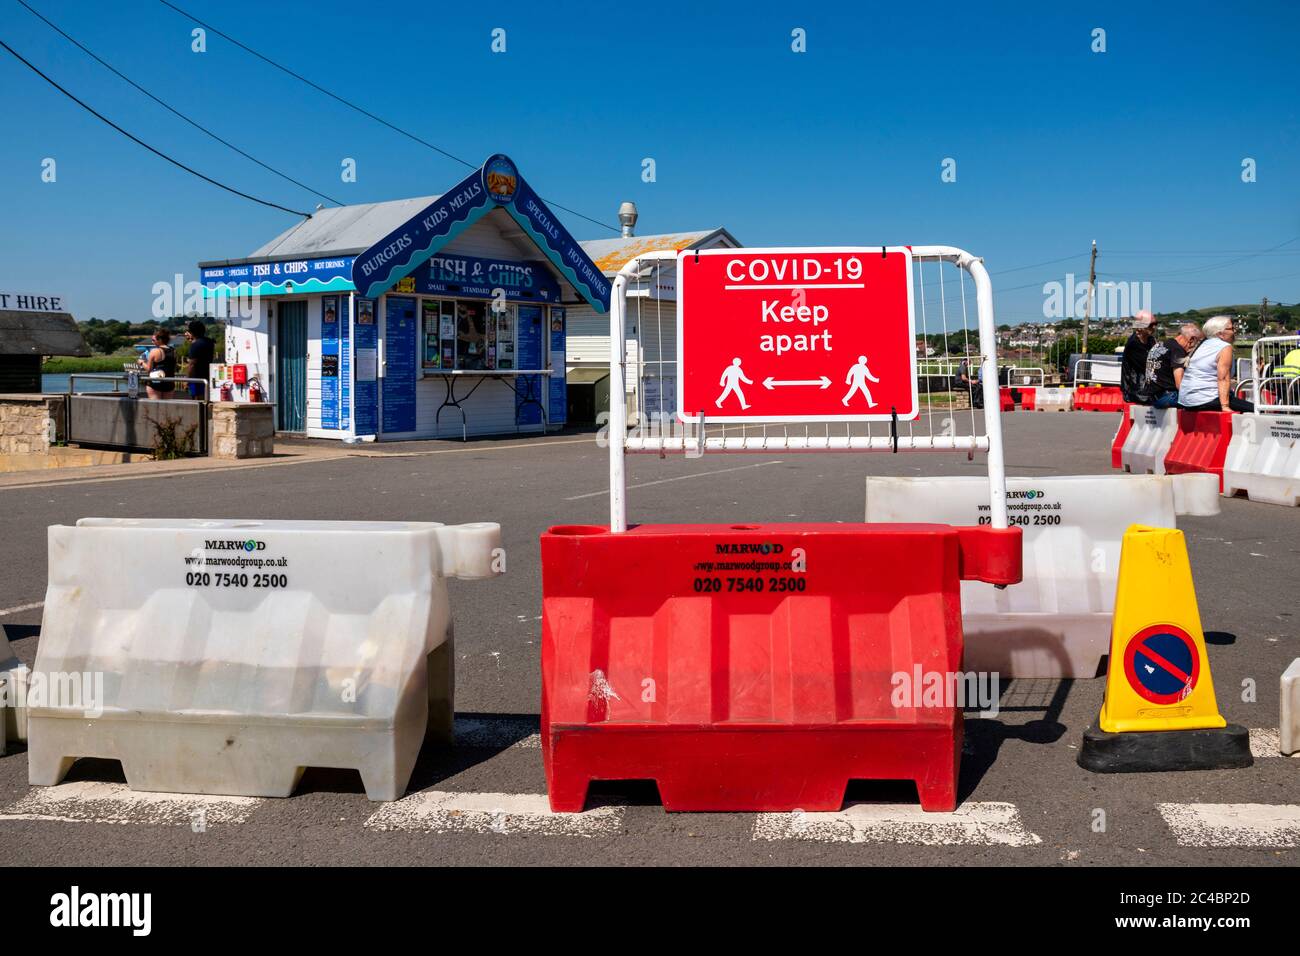 Covid-19 social distancing, where the road has been closed to make room for people queuing at seaside food huts, West Bay, Dorset, UK. Stock Photo